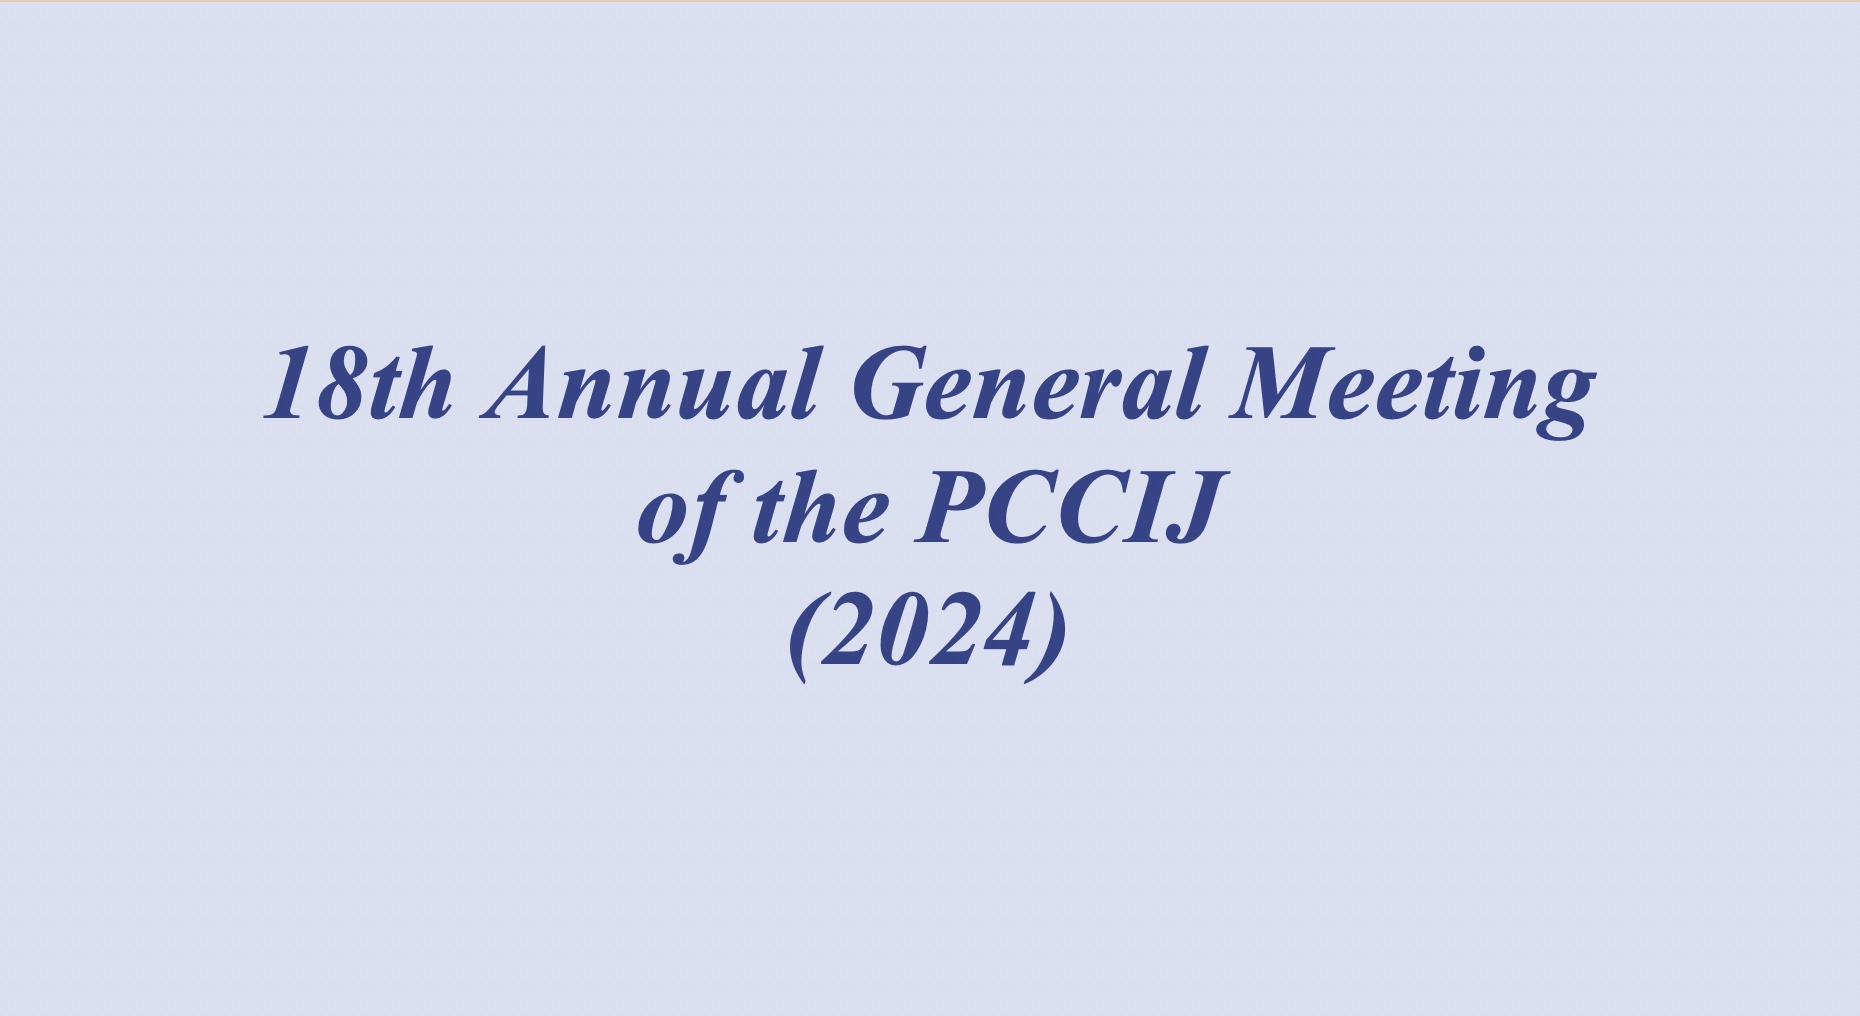 July 10, 2024 - 18th Annual General Meeting of PCCIJ followed by a Reception Party.